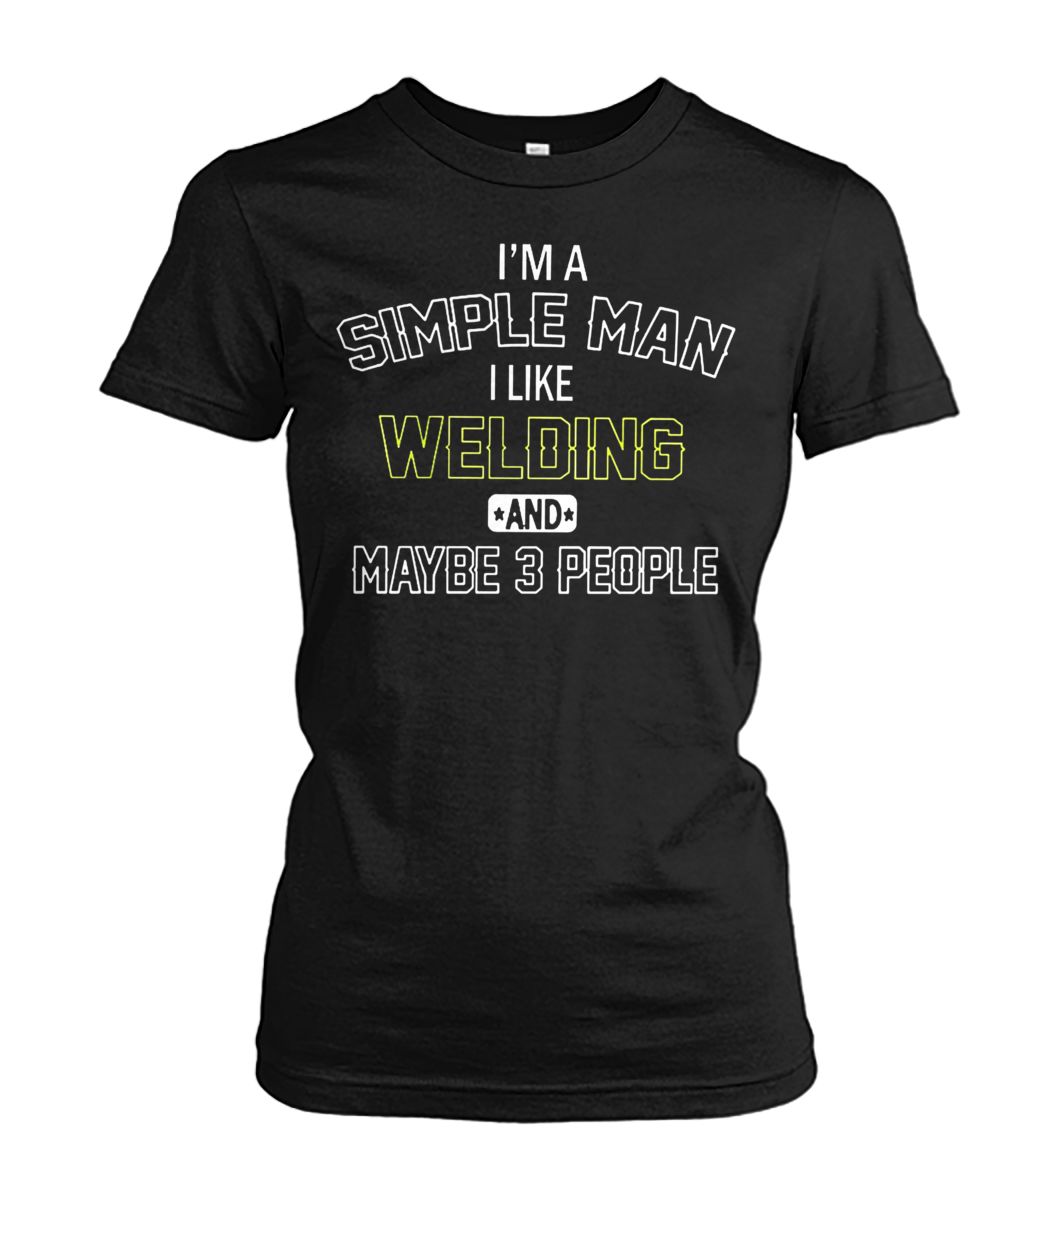 I'm a simple man I like welding and maybe 3 people women's crew tee